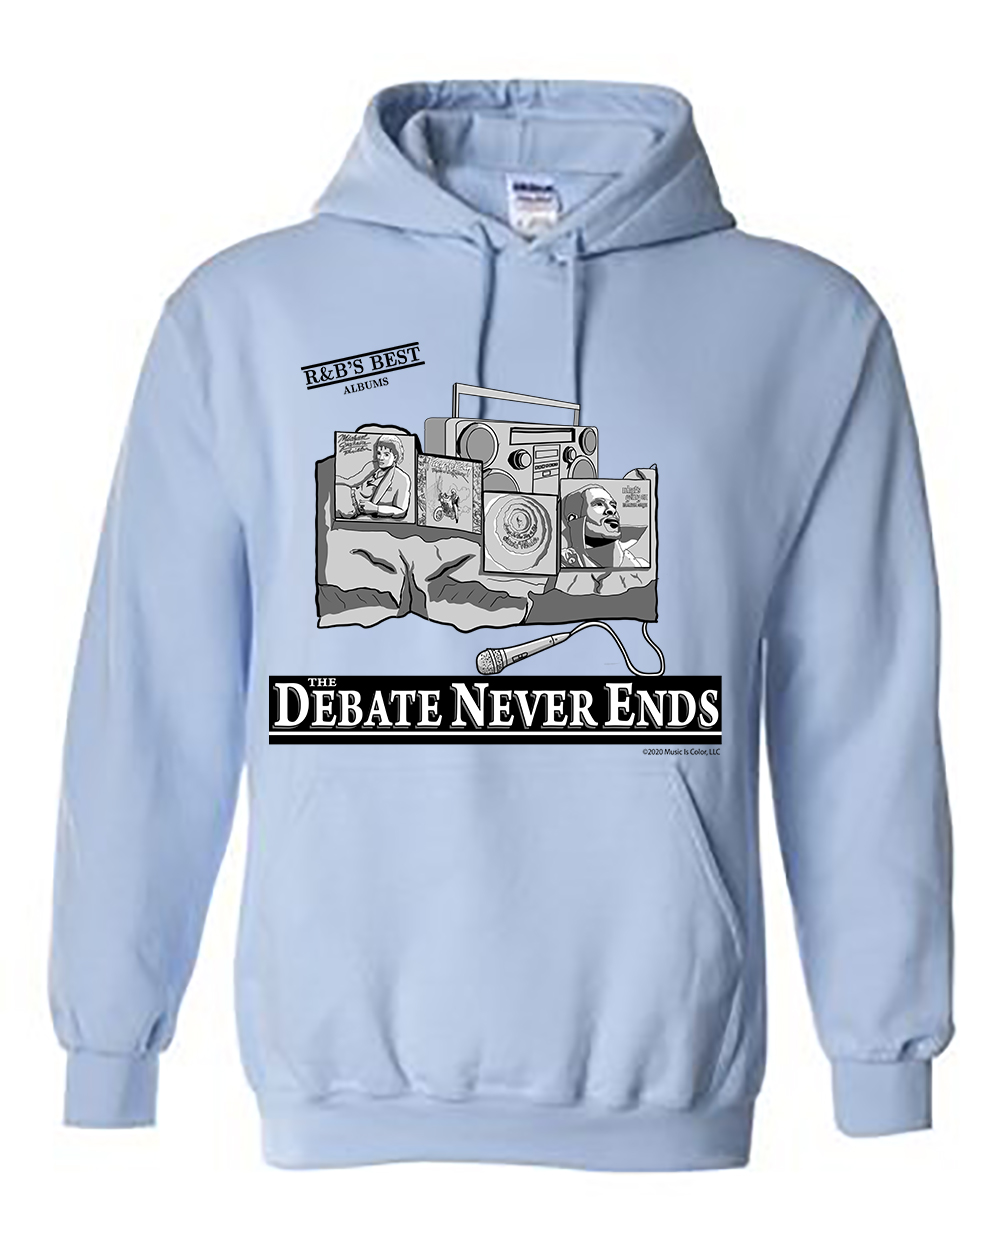 Mount Rushmore - R&B’s Best Albums (Light Blue Heavy Duty Hoodie)